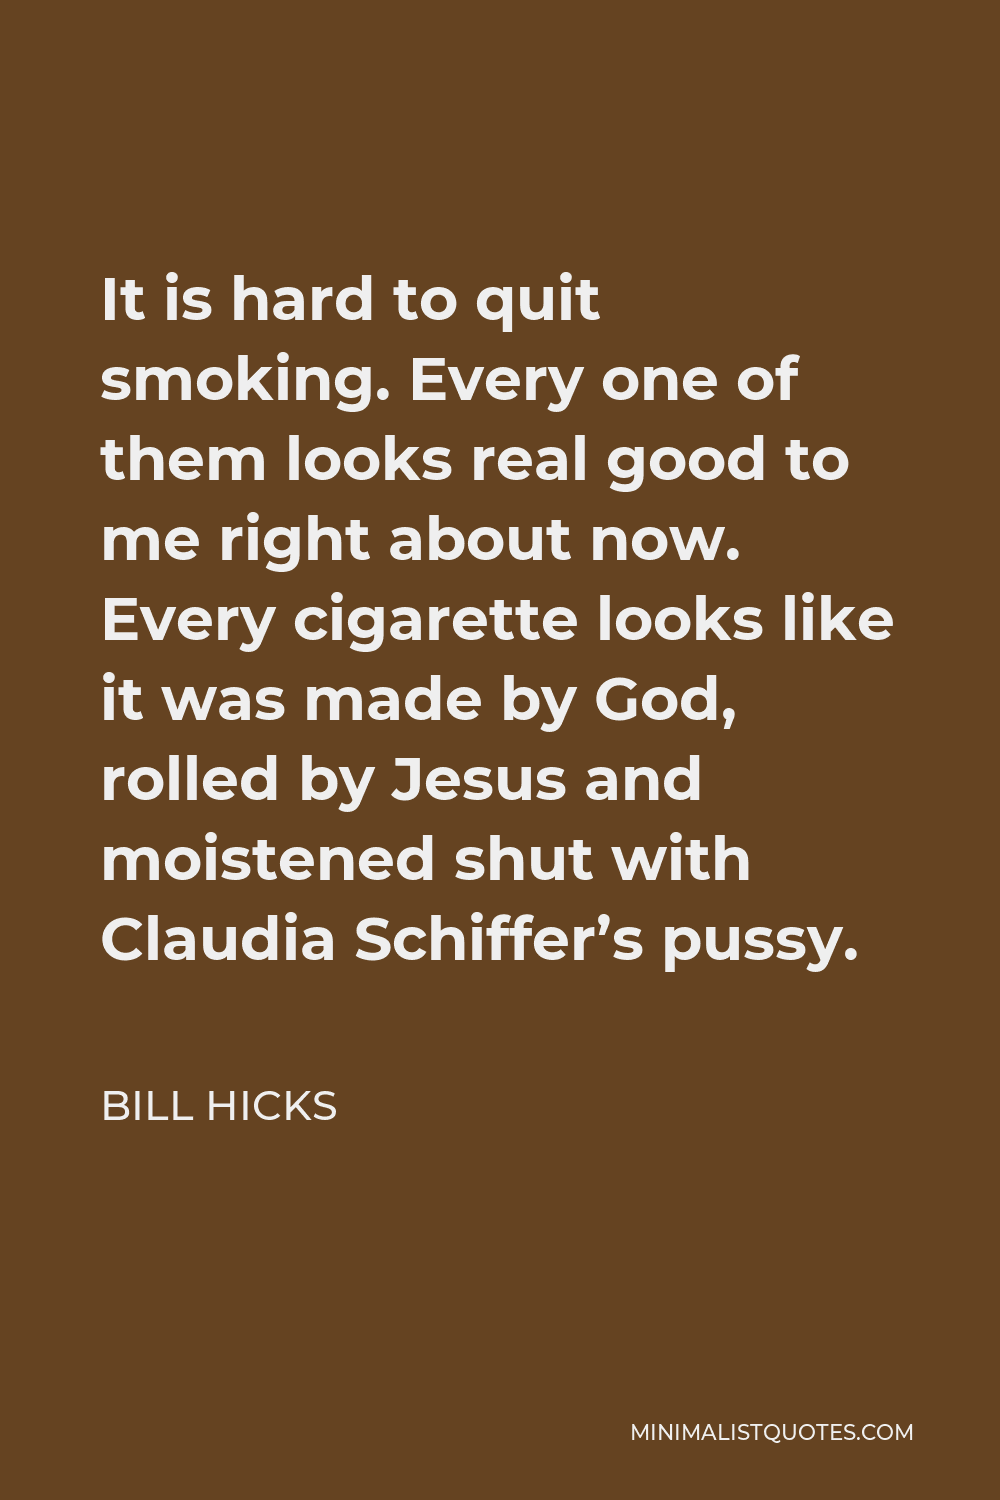 Bill Hicks Quote - It is hard to quit smoking. Every one of them looks real good to me right about now. Every cigarette looks like it was made by God, rolled by Jesus and moistened shut with Claudia Schiffer’s pussy.